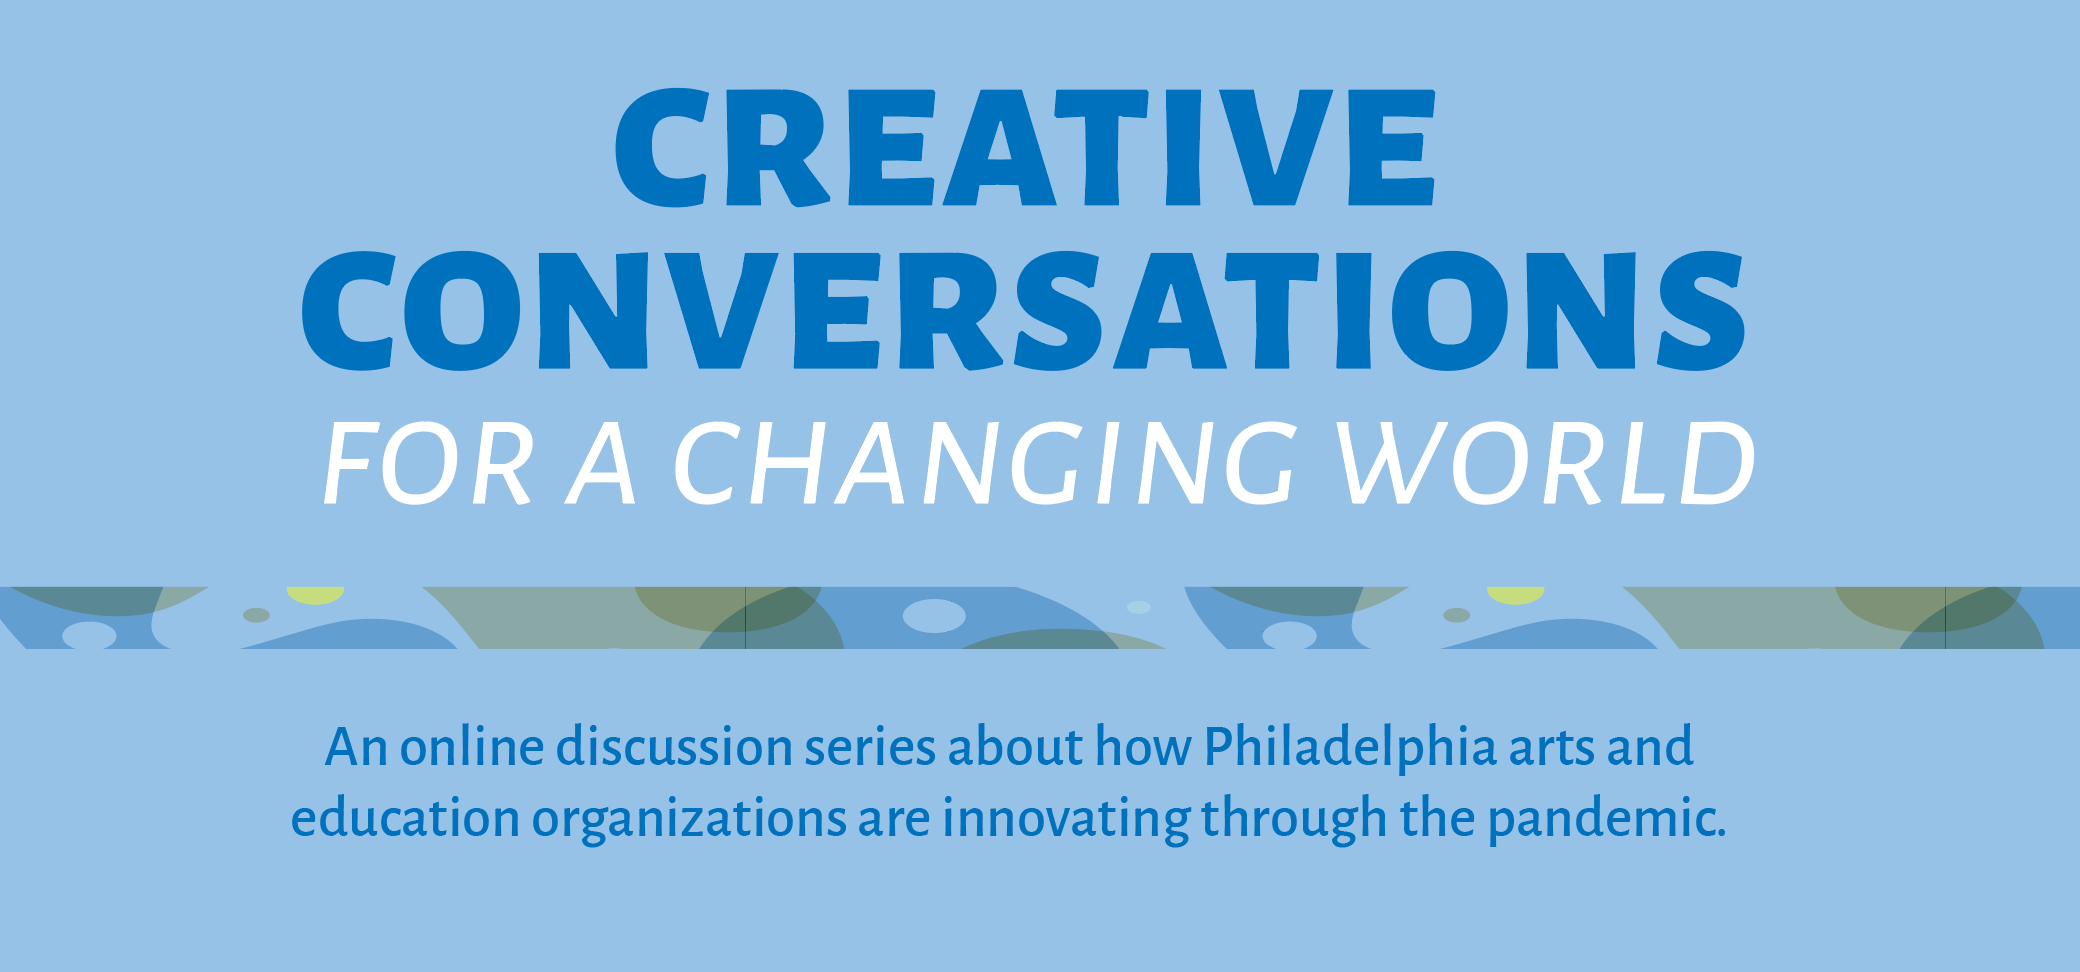 Creative Conversations for a Changing World